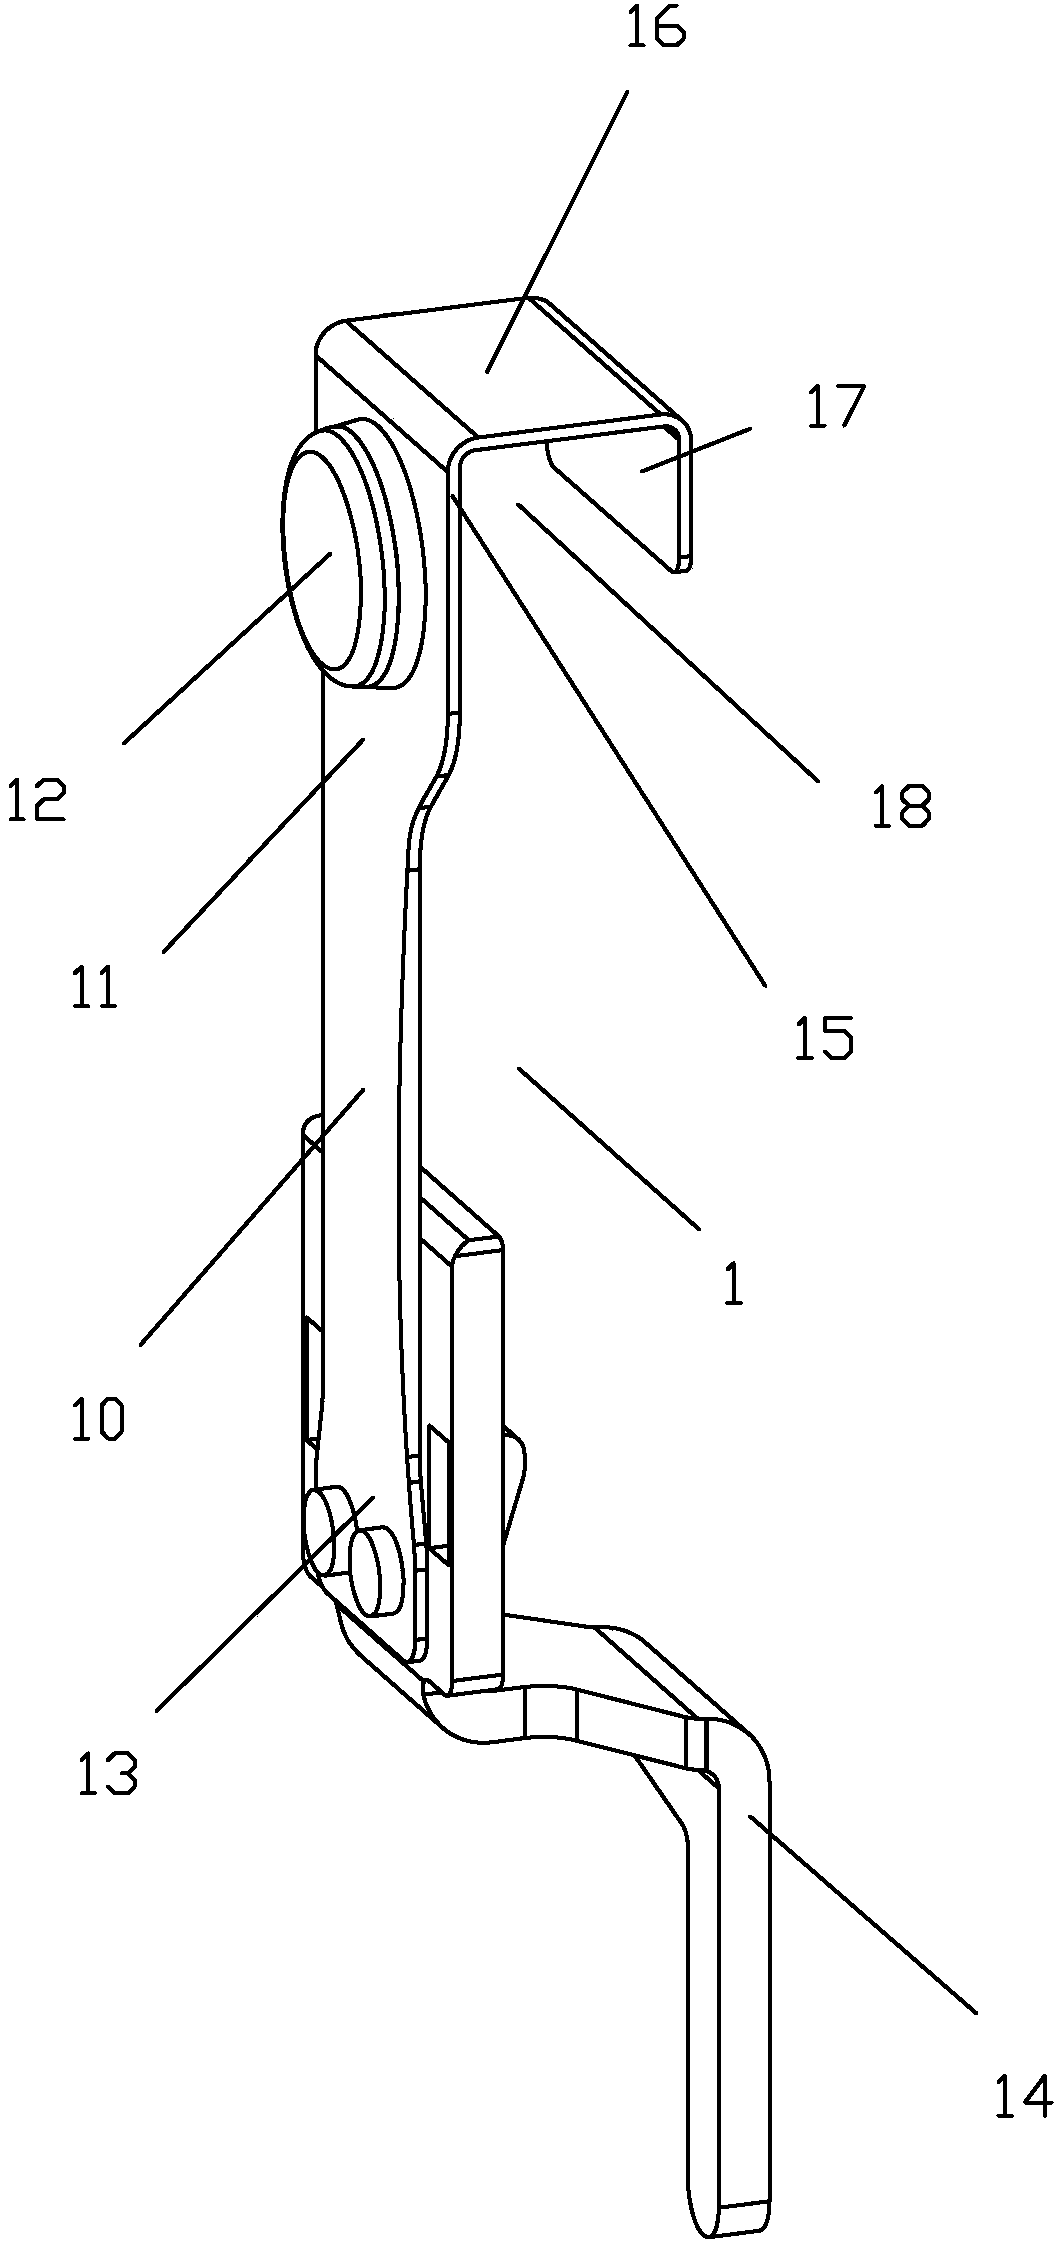 Safe relay and movable contact spring therefor